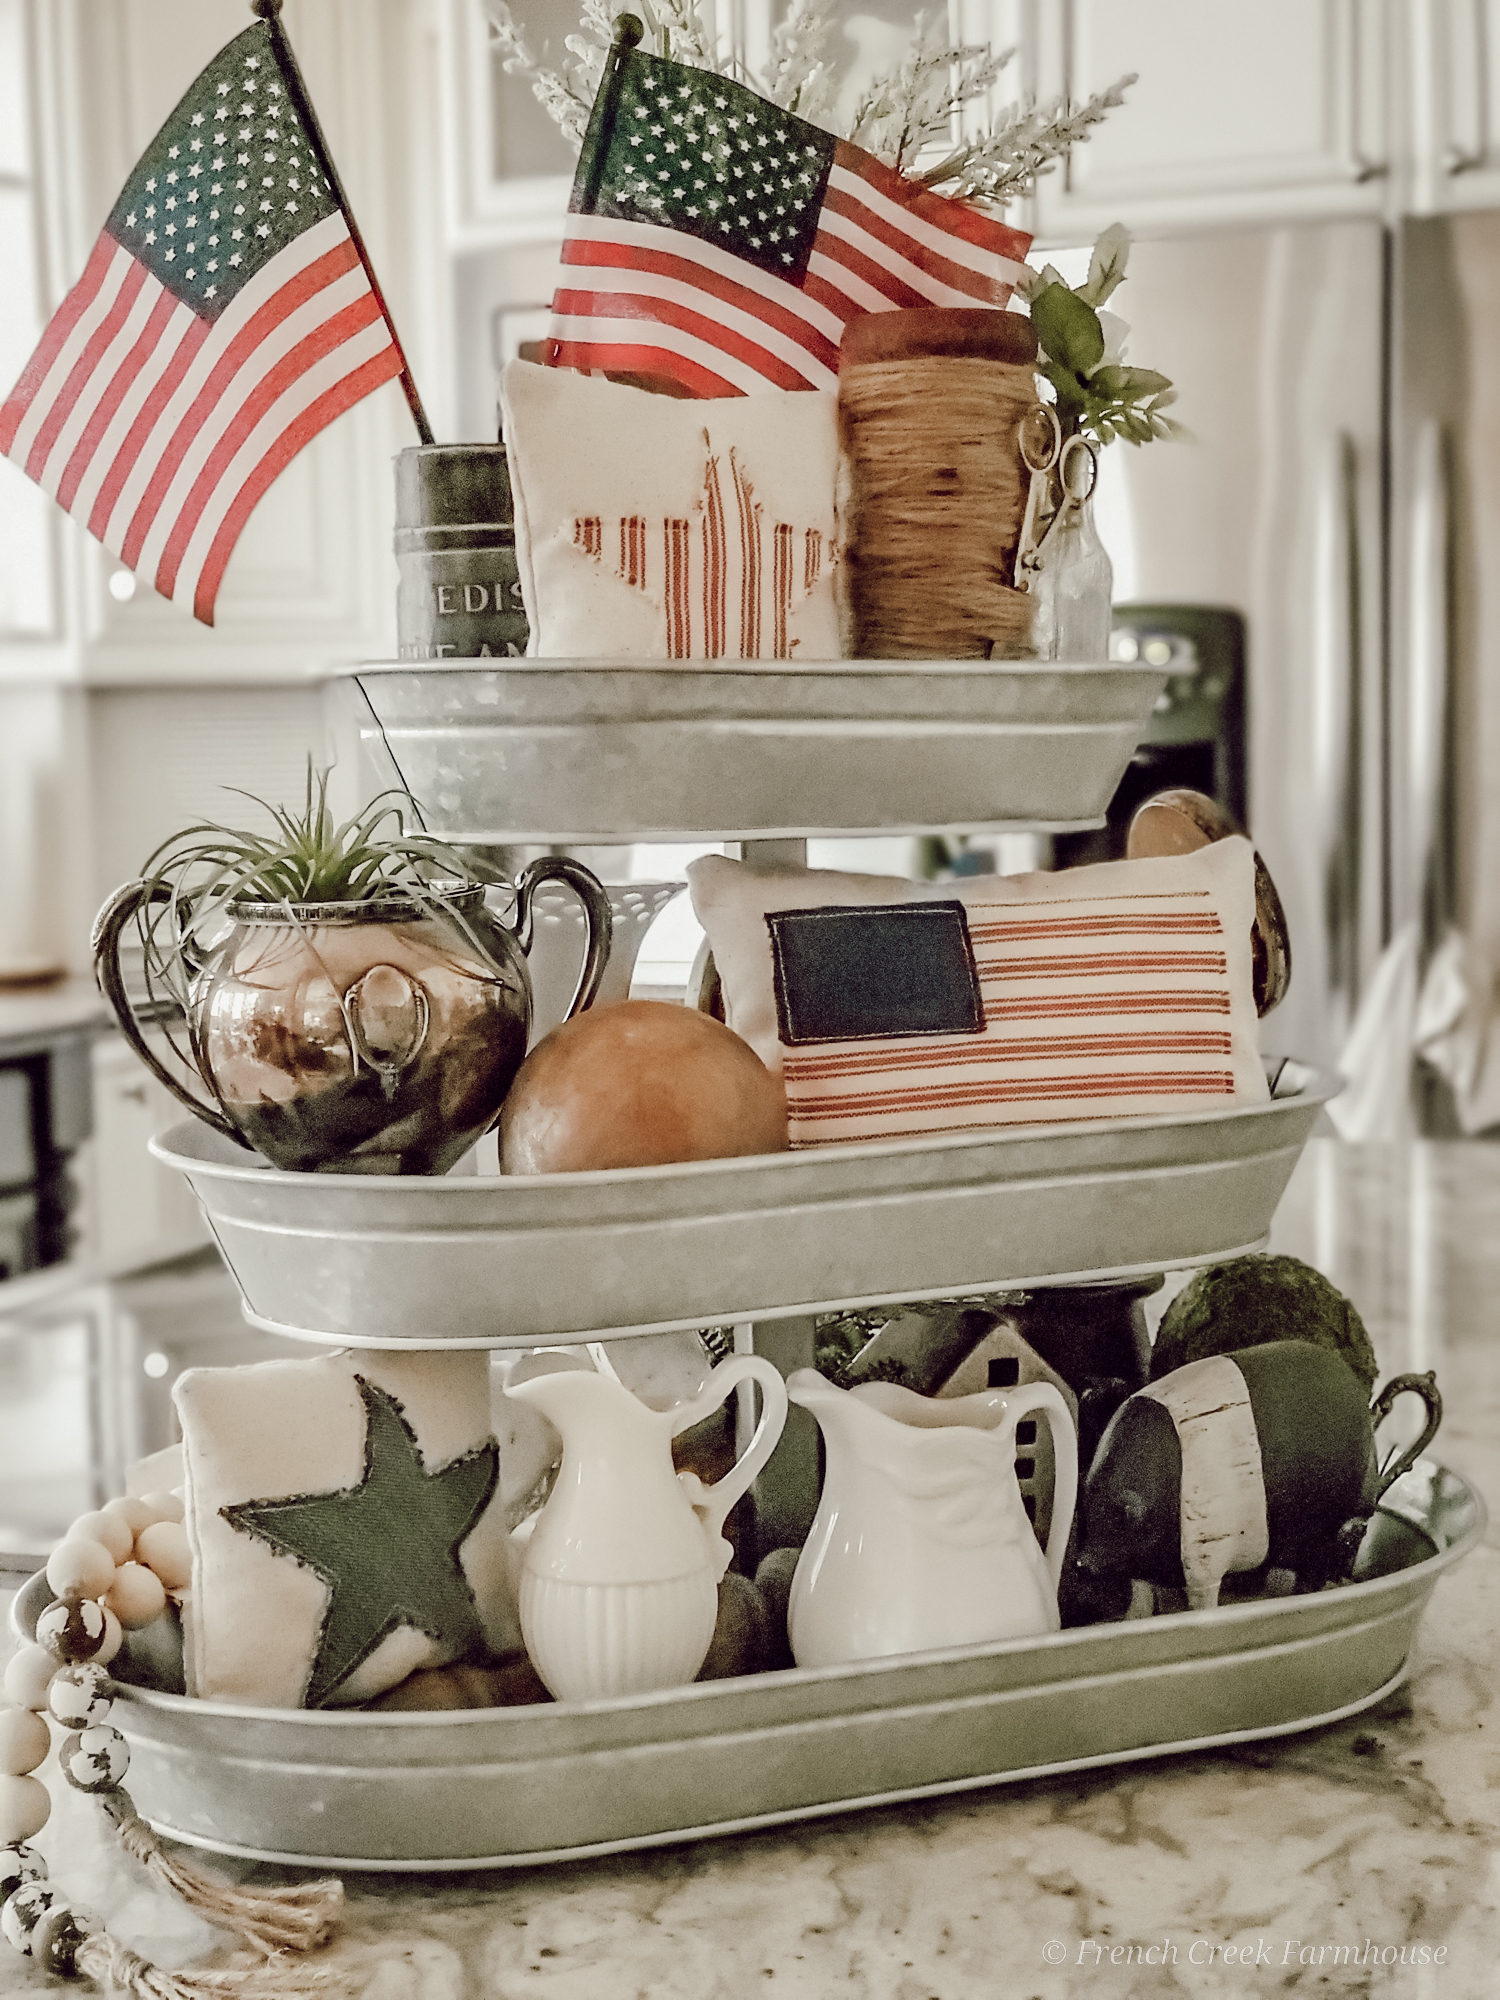 Patriotic themed tiered tray on kitchen island